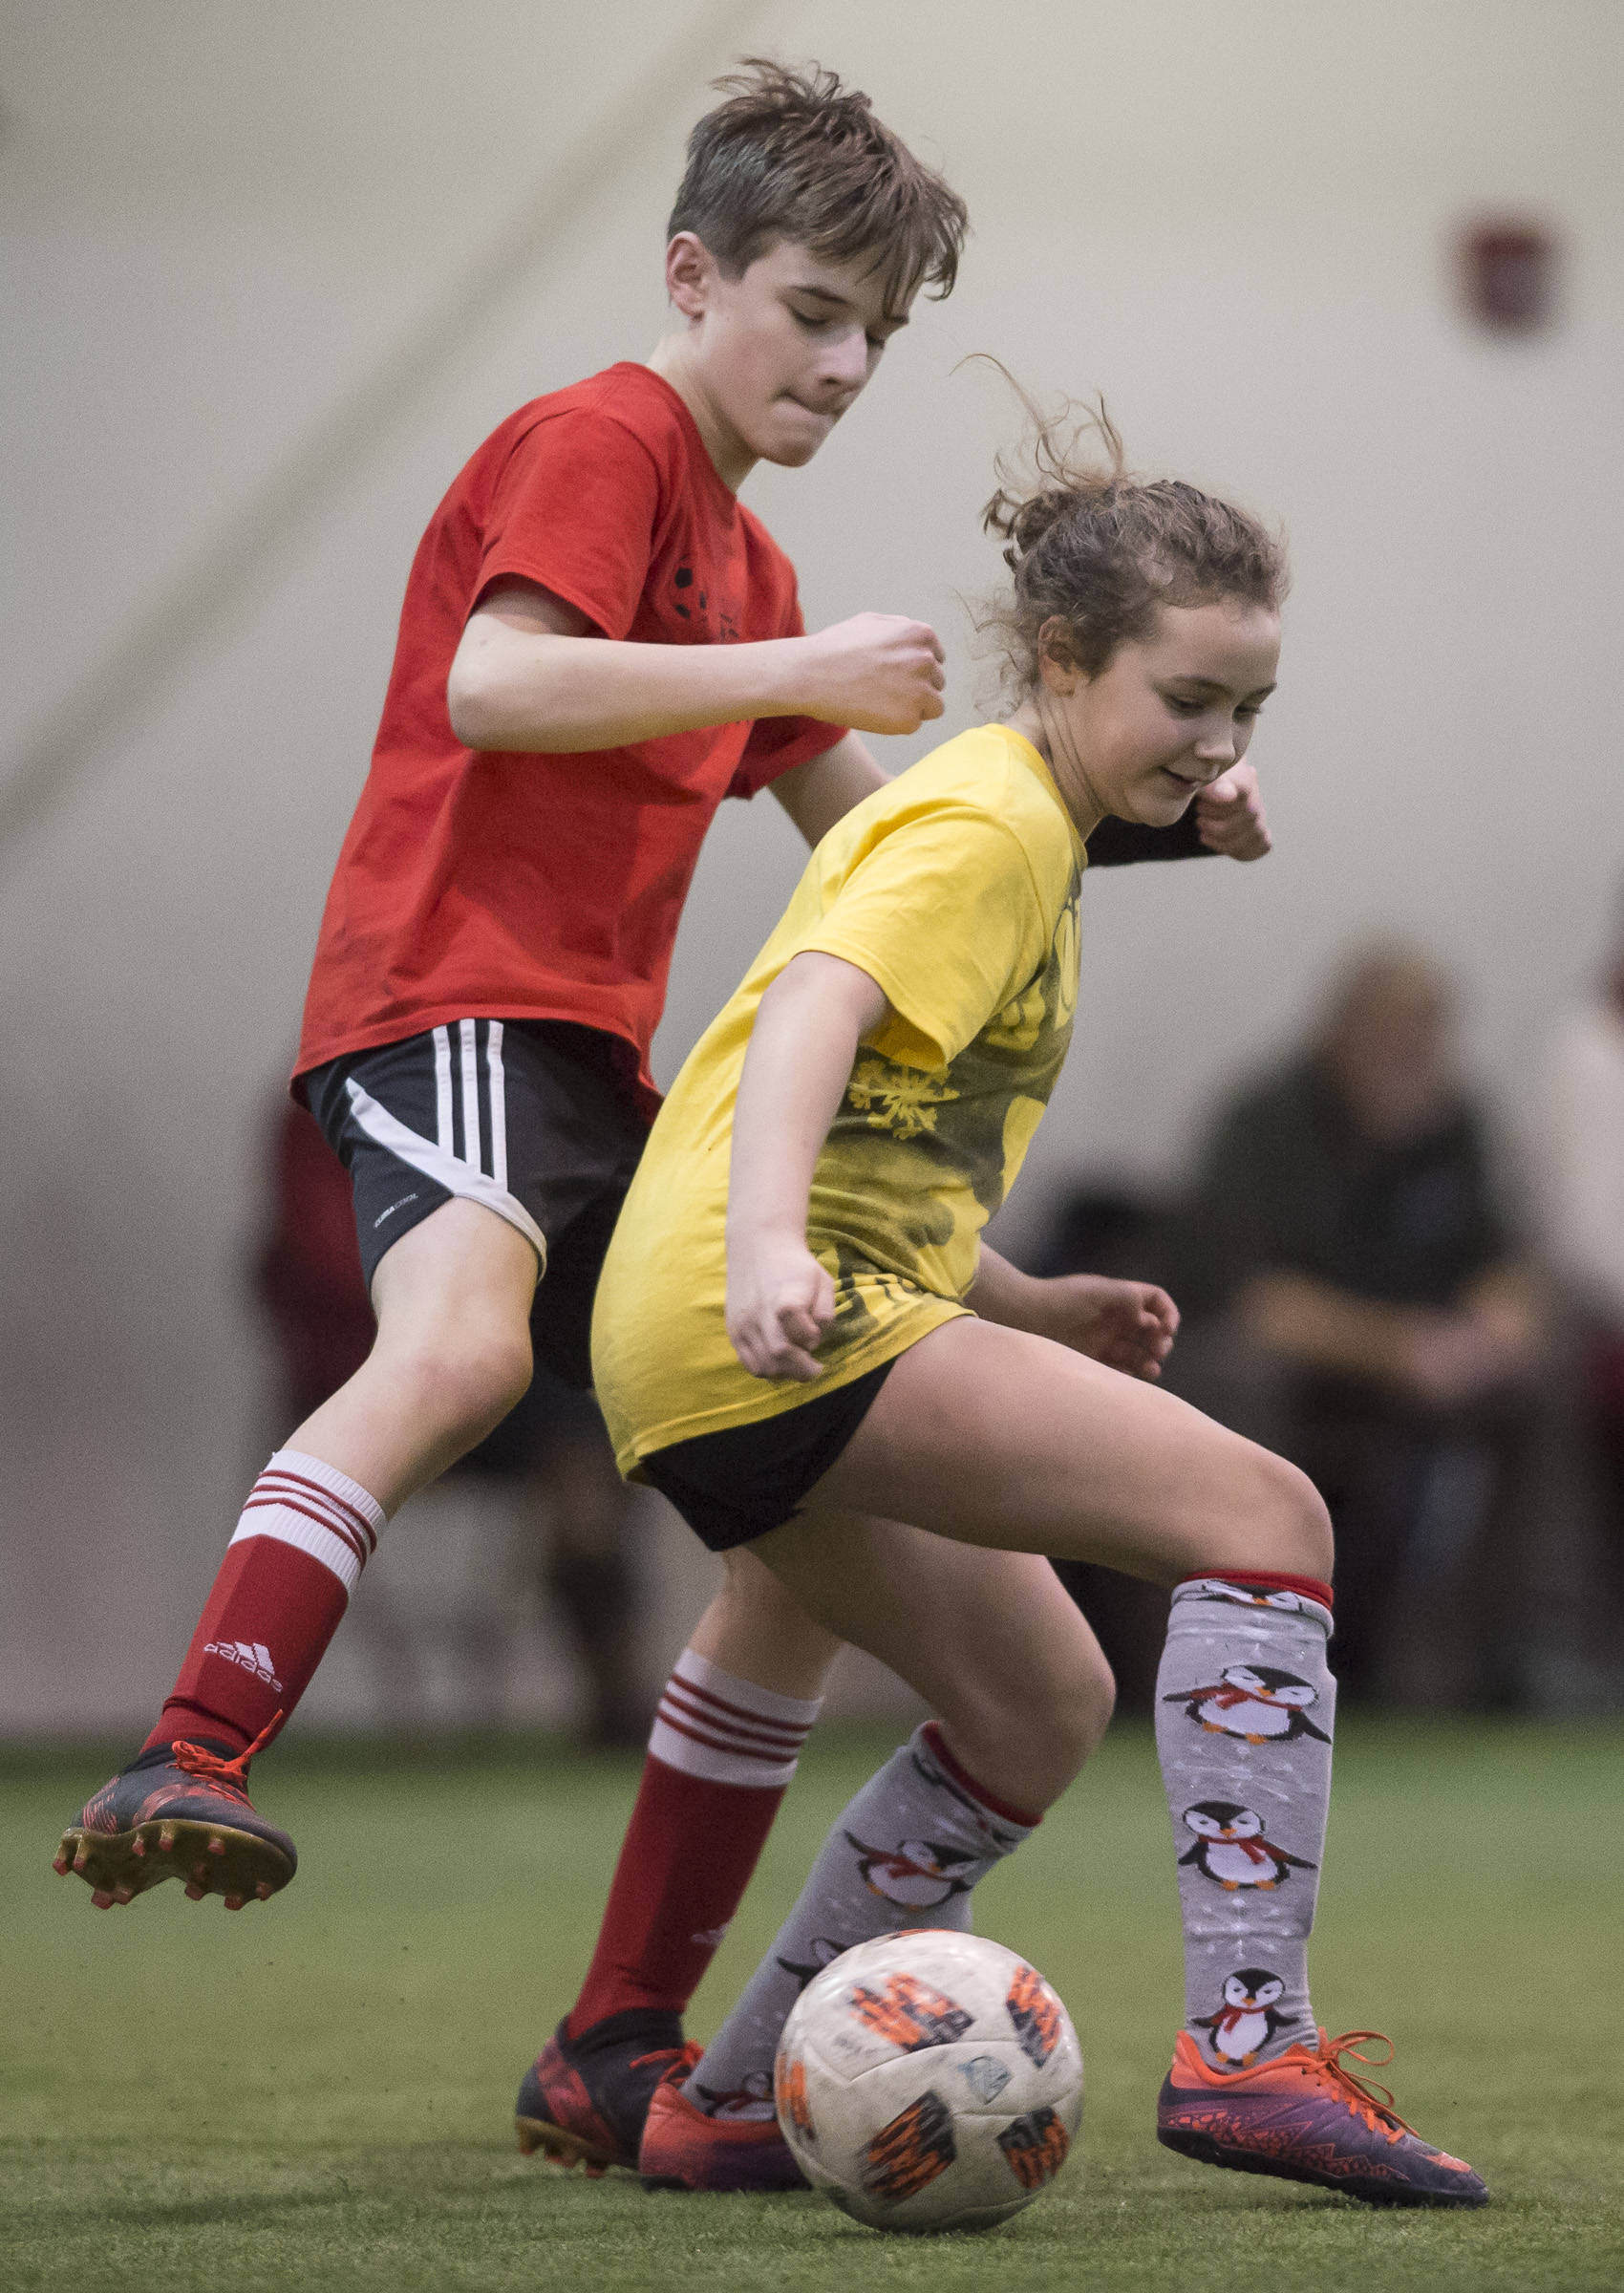 IceKickles play against the Rum Pa Pum at the annual Holiday Cup Soccer Tournament at the Wells Fargo Dimond Park Field House on Wednesday, Dec. 26, 2018. (Michael Penn | Juneau Empire)